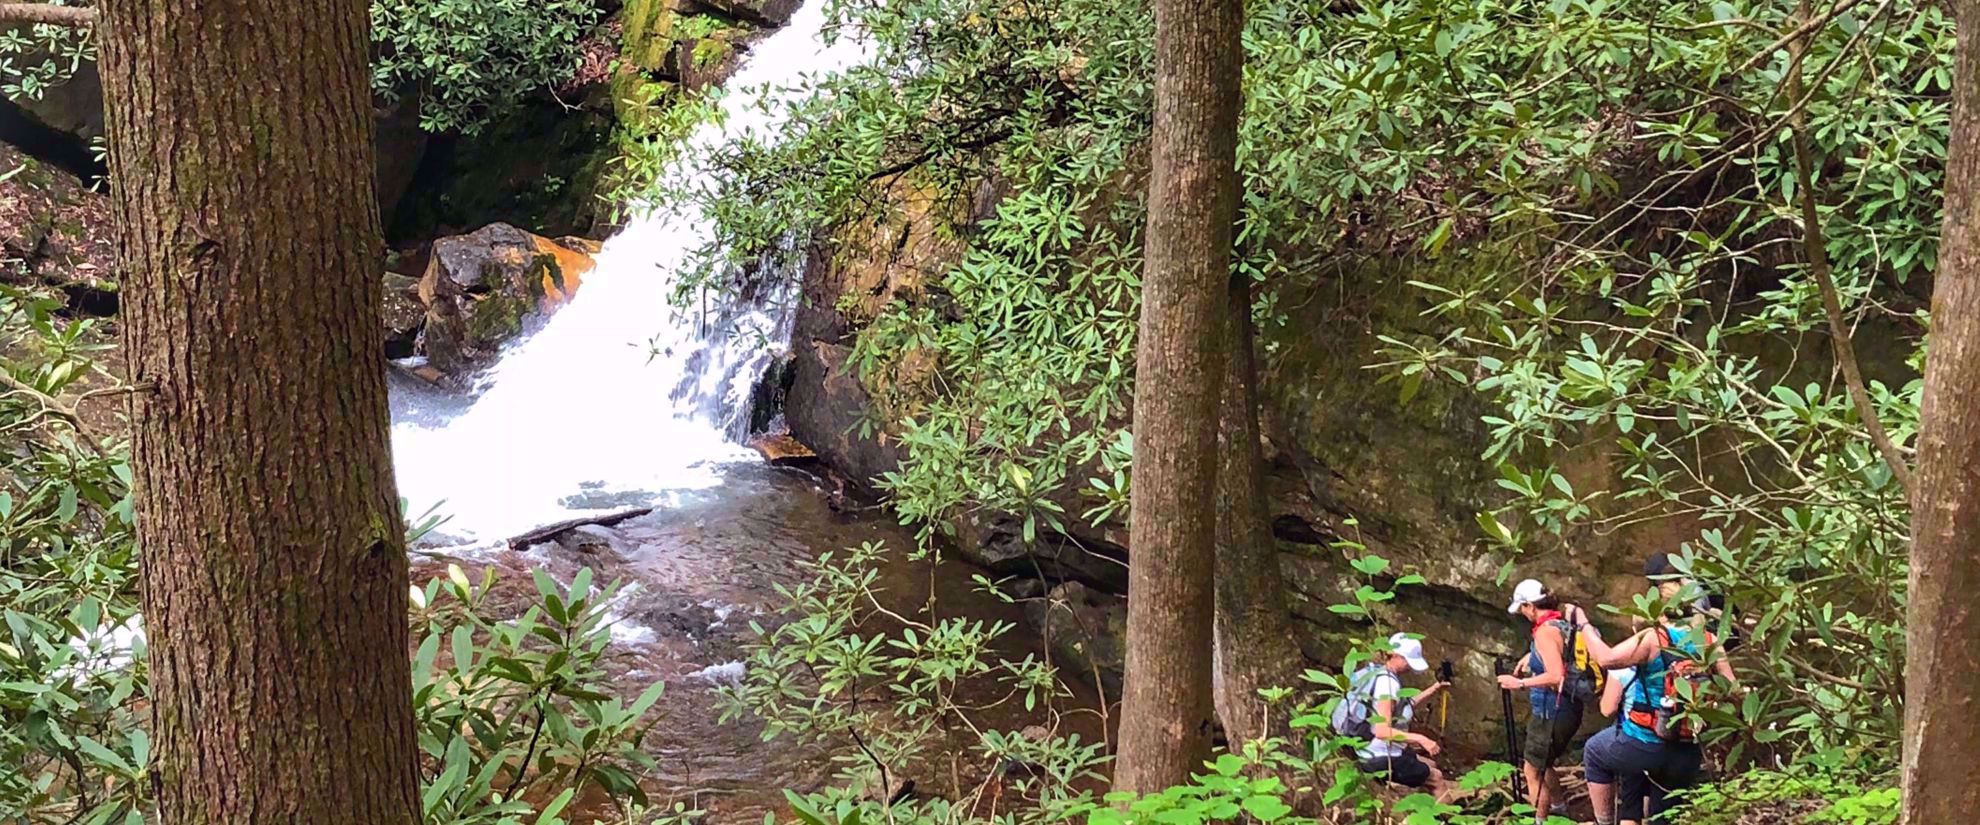 women hiking down to waterfall surrounded by greenery